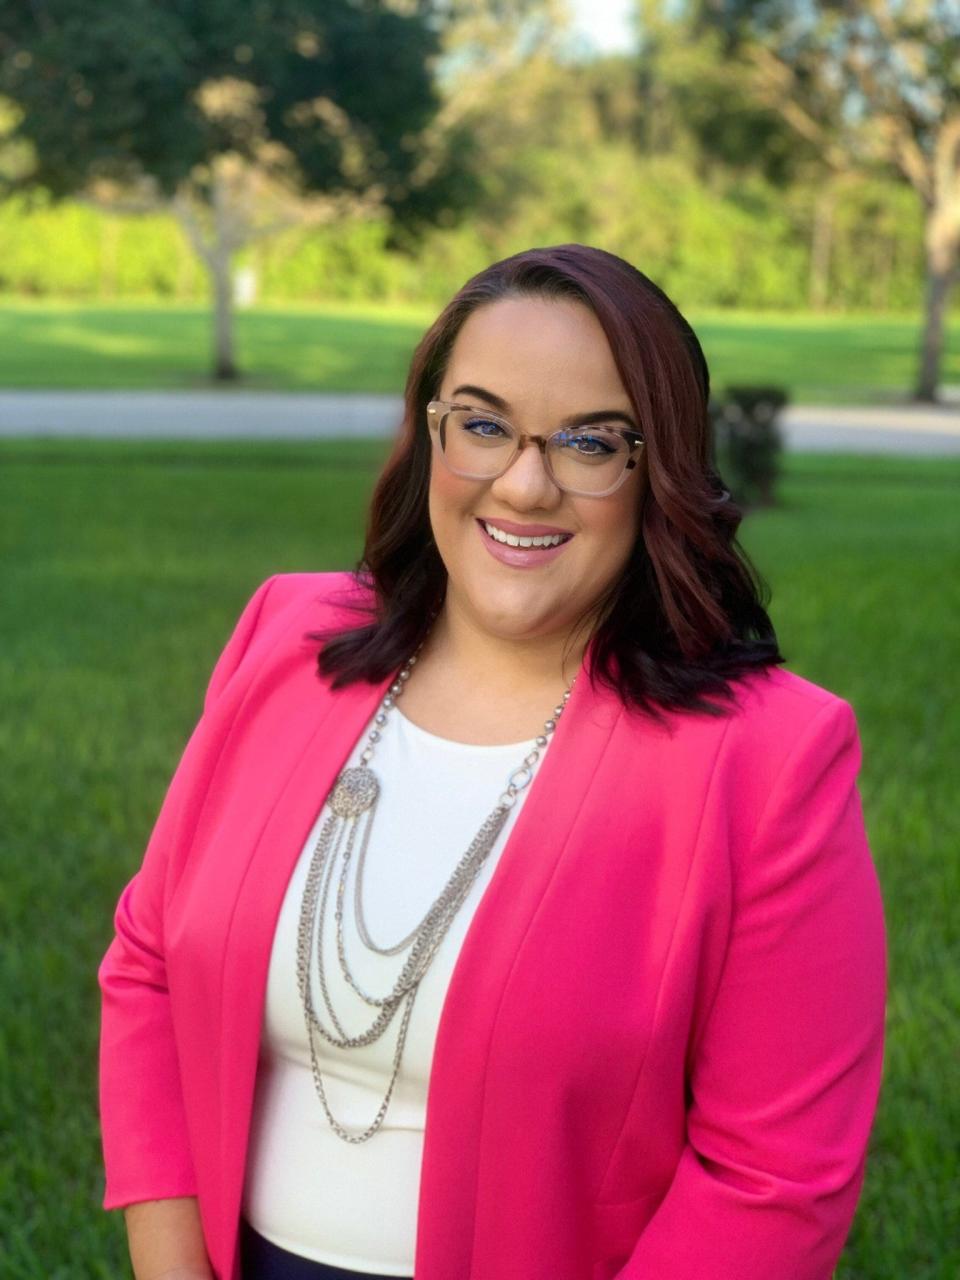 Angelique Contreras, of the Palm Springs area, a 2022 candidate for Palm Beach County School Board (District 4).